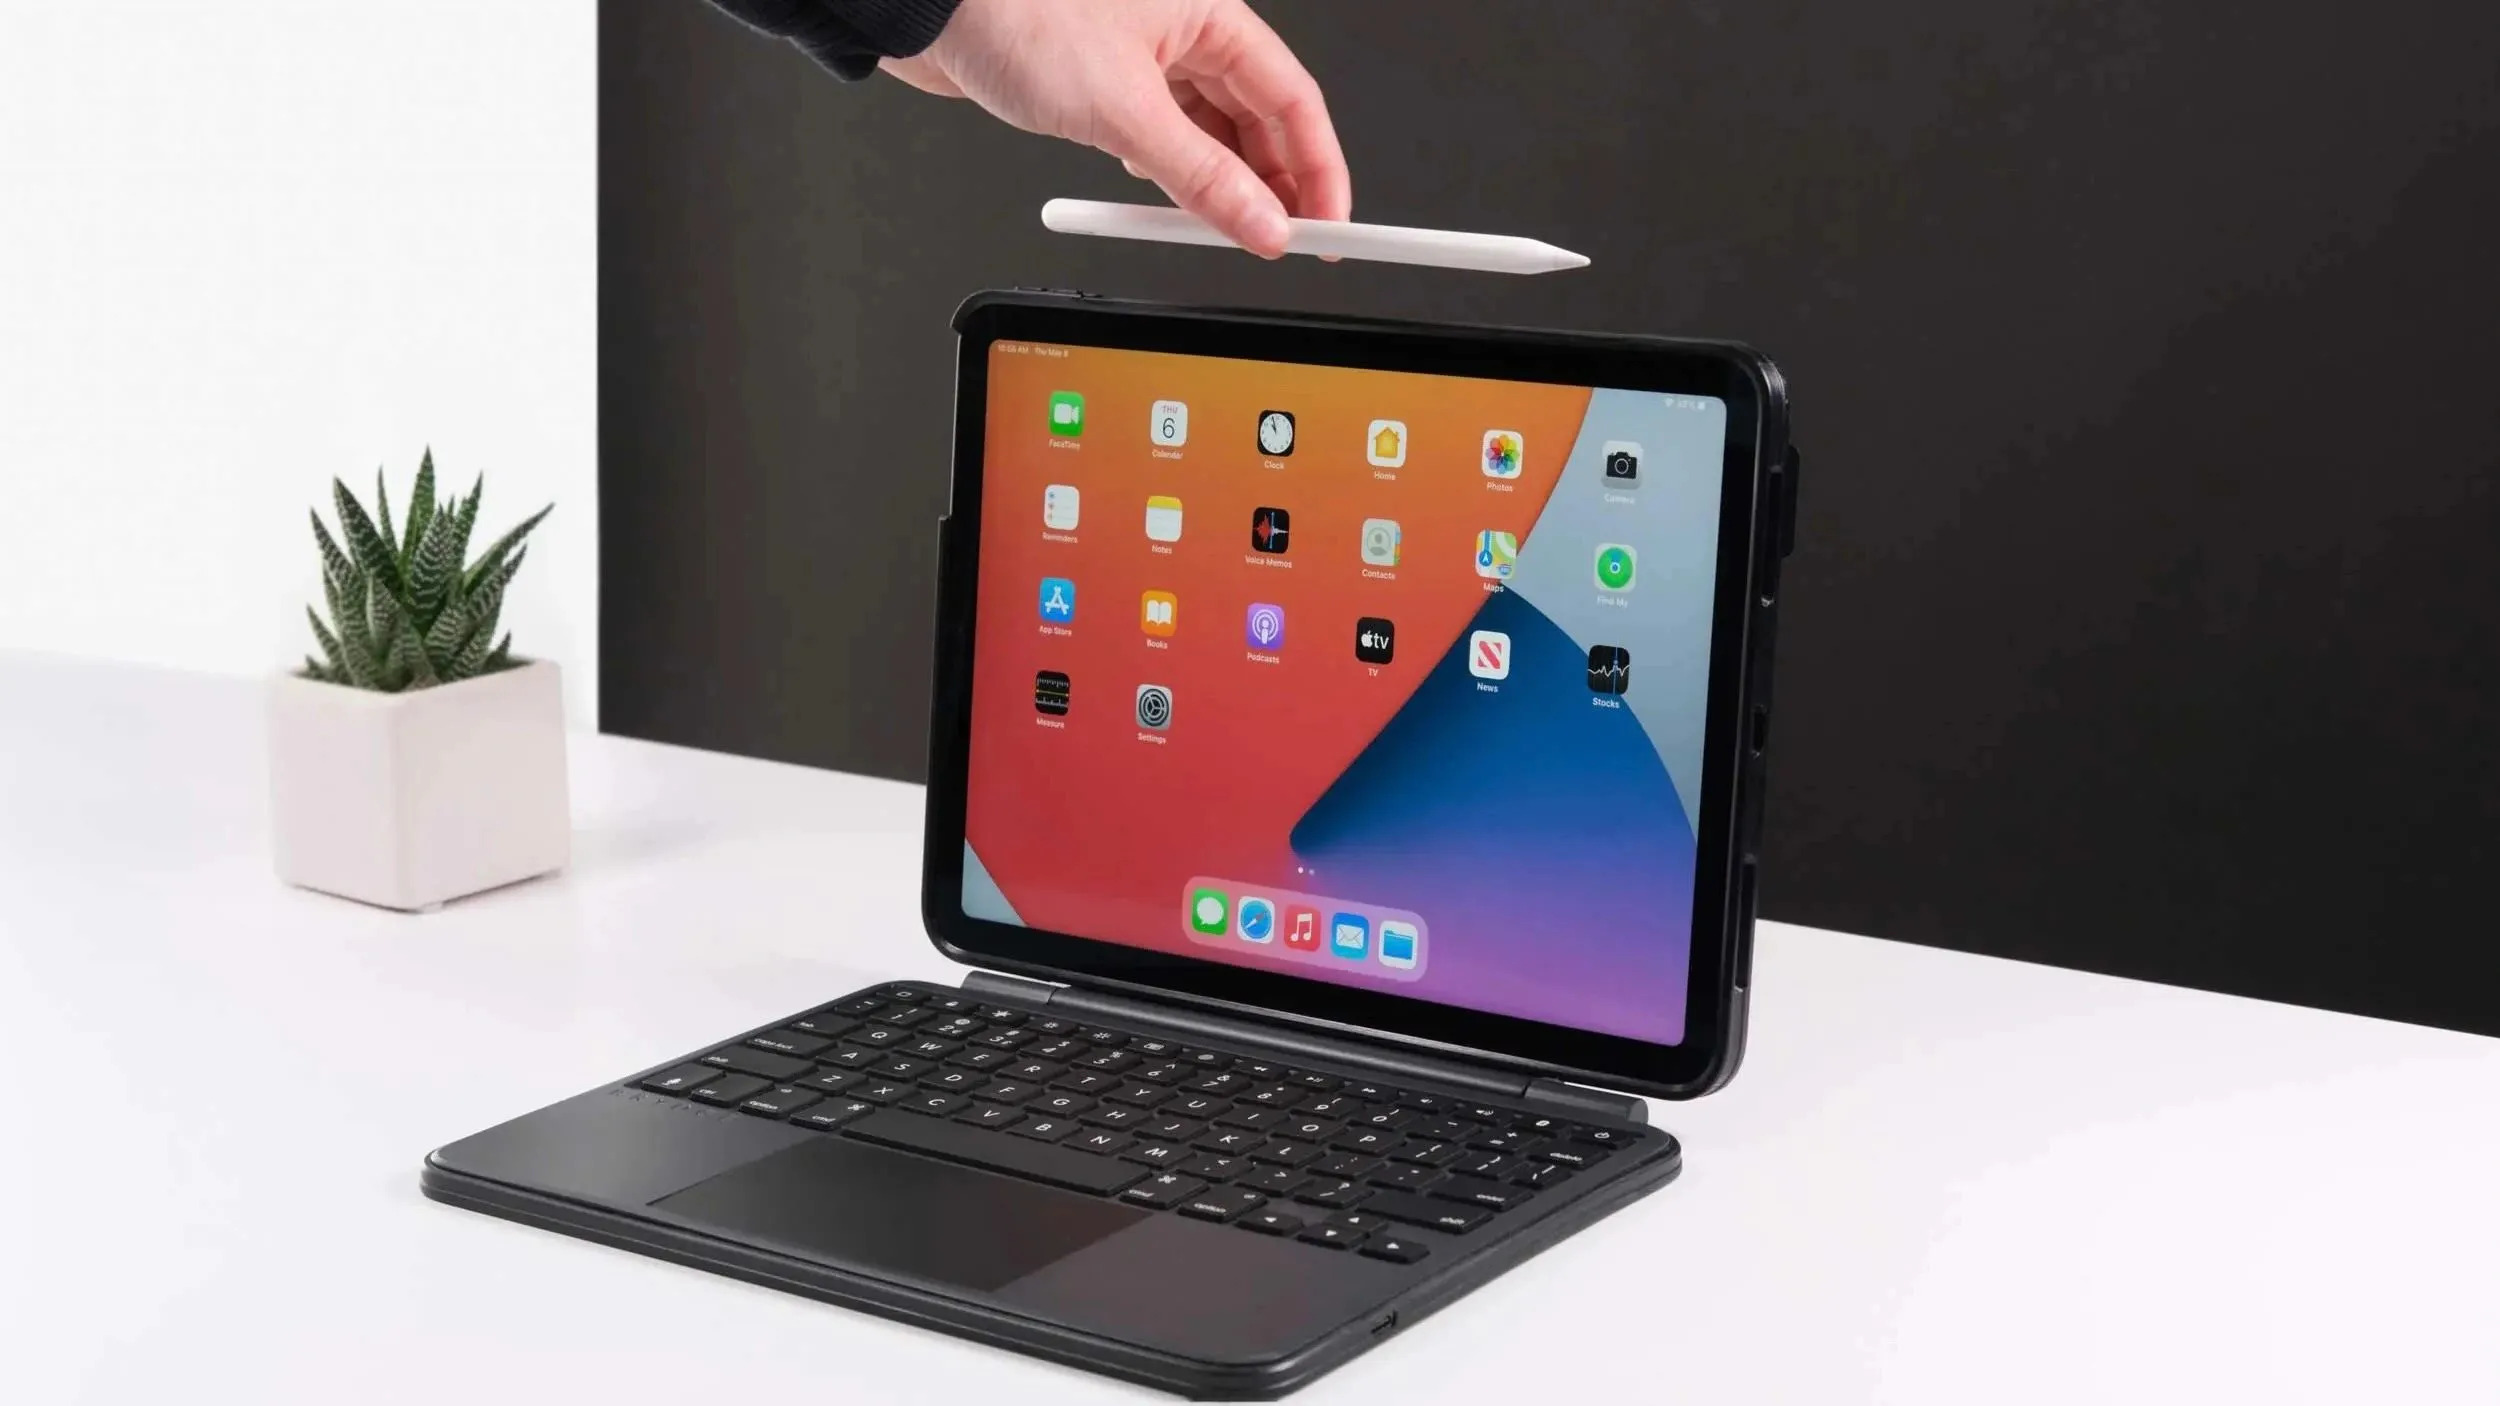 How To Connect A Wireless Keyboard To A Tablet